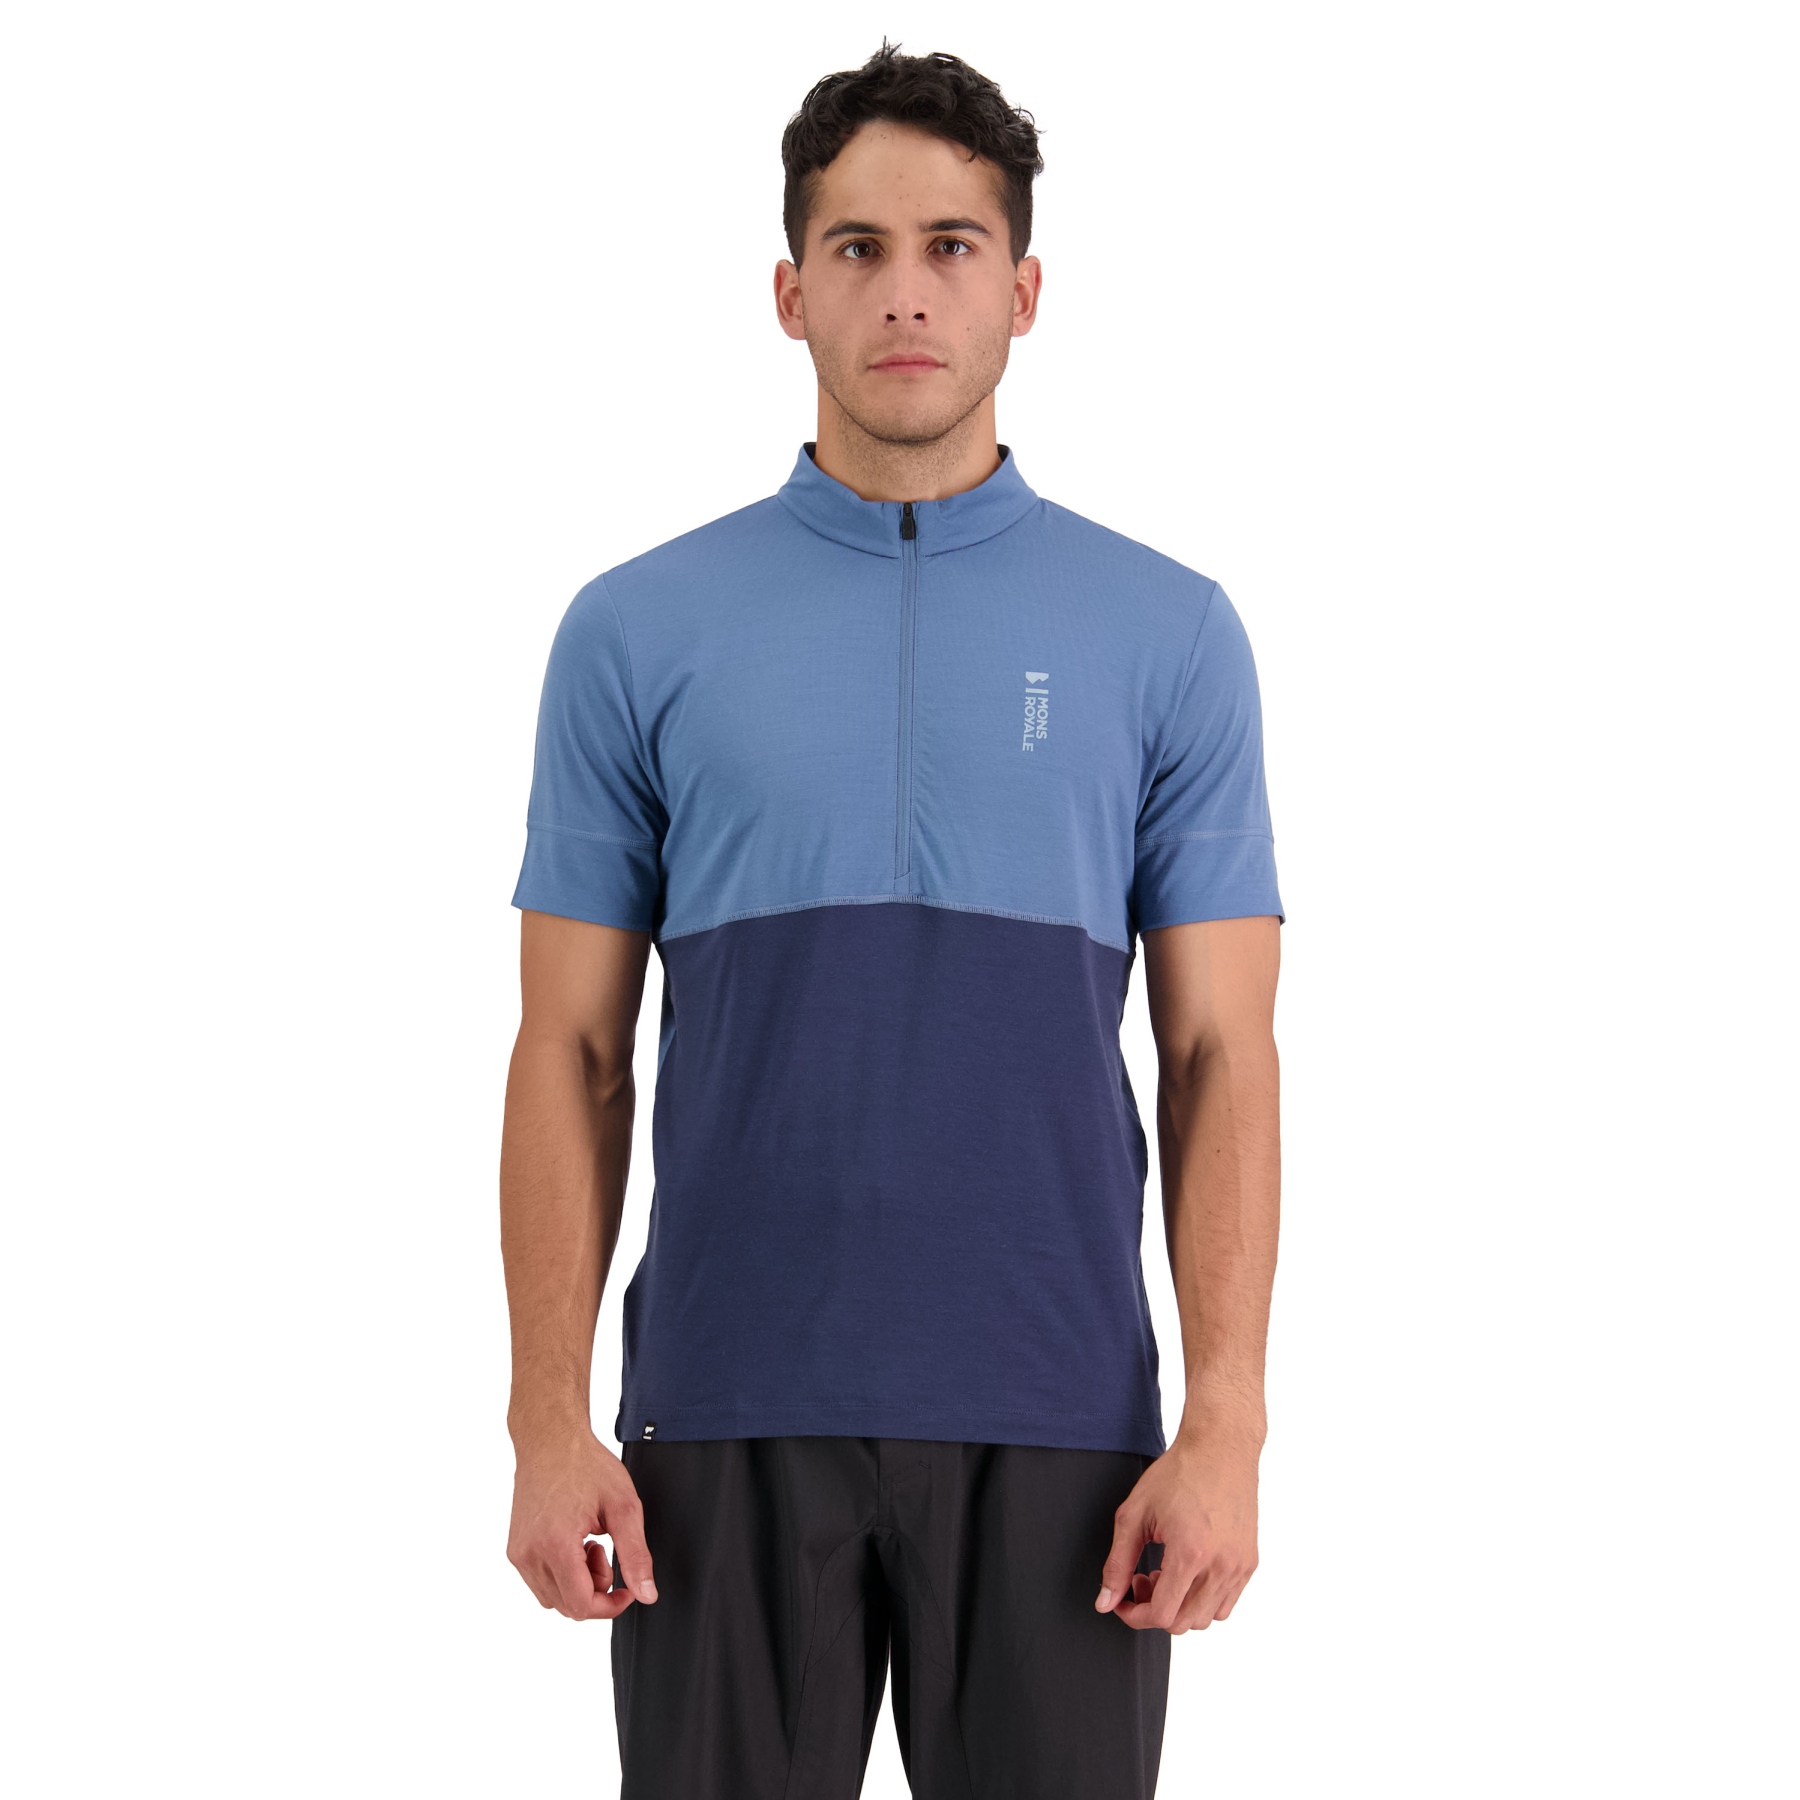 Picture of Mons Royale Cadence Half Zip Tee - blue slate / midnight